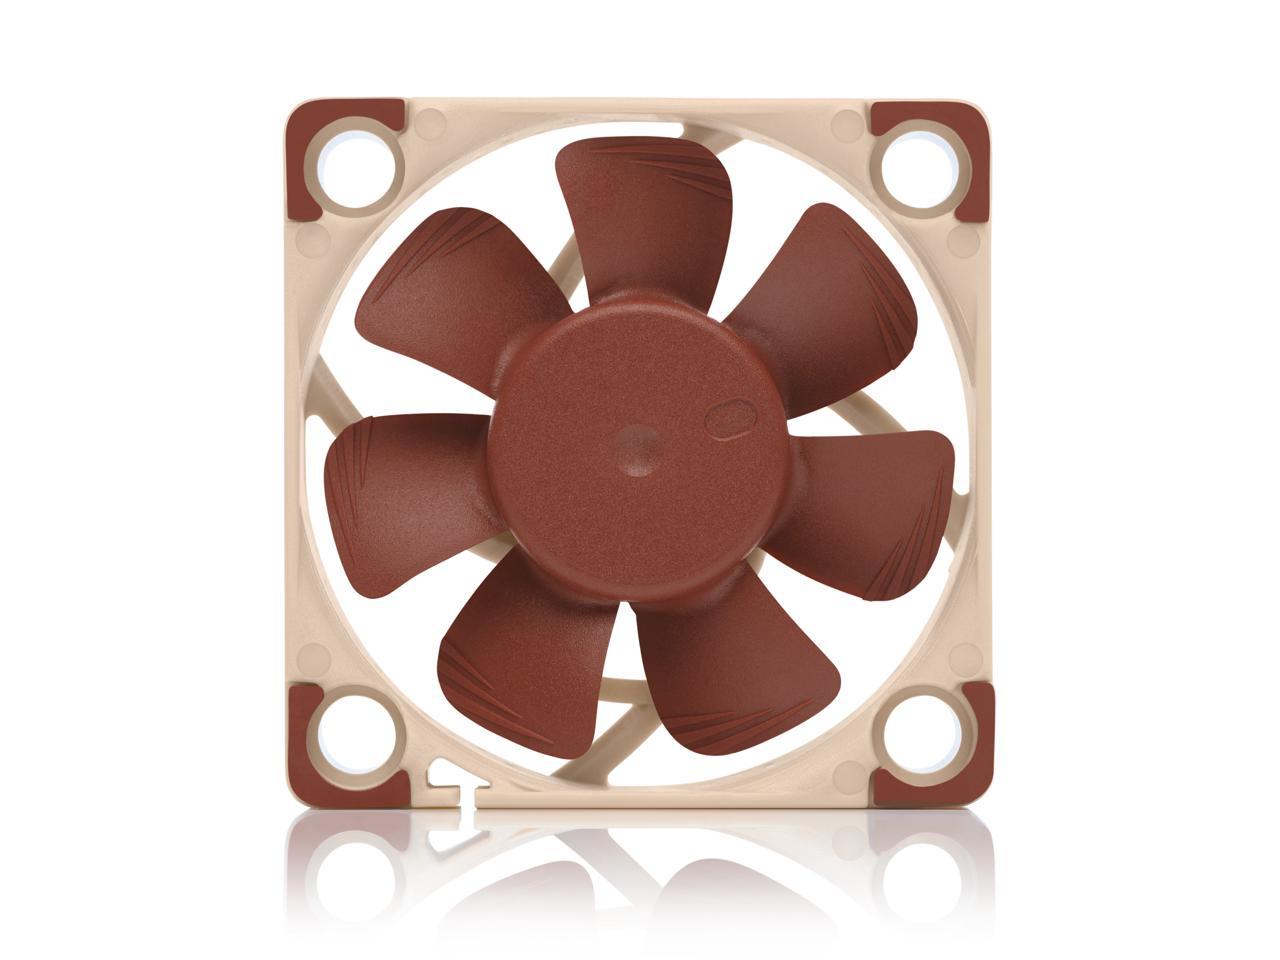 Noctua Nf-A4X10 5V Pwm, Premium Quiet Fan With Usb Power Adaptor Cable, 4-Pin, 5V Version (40X10Mm, Brown)